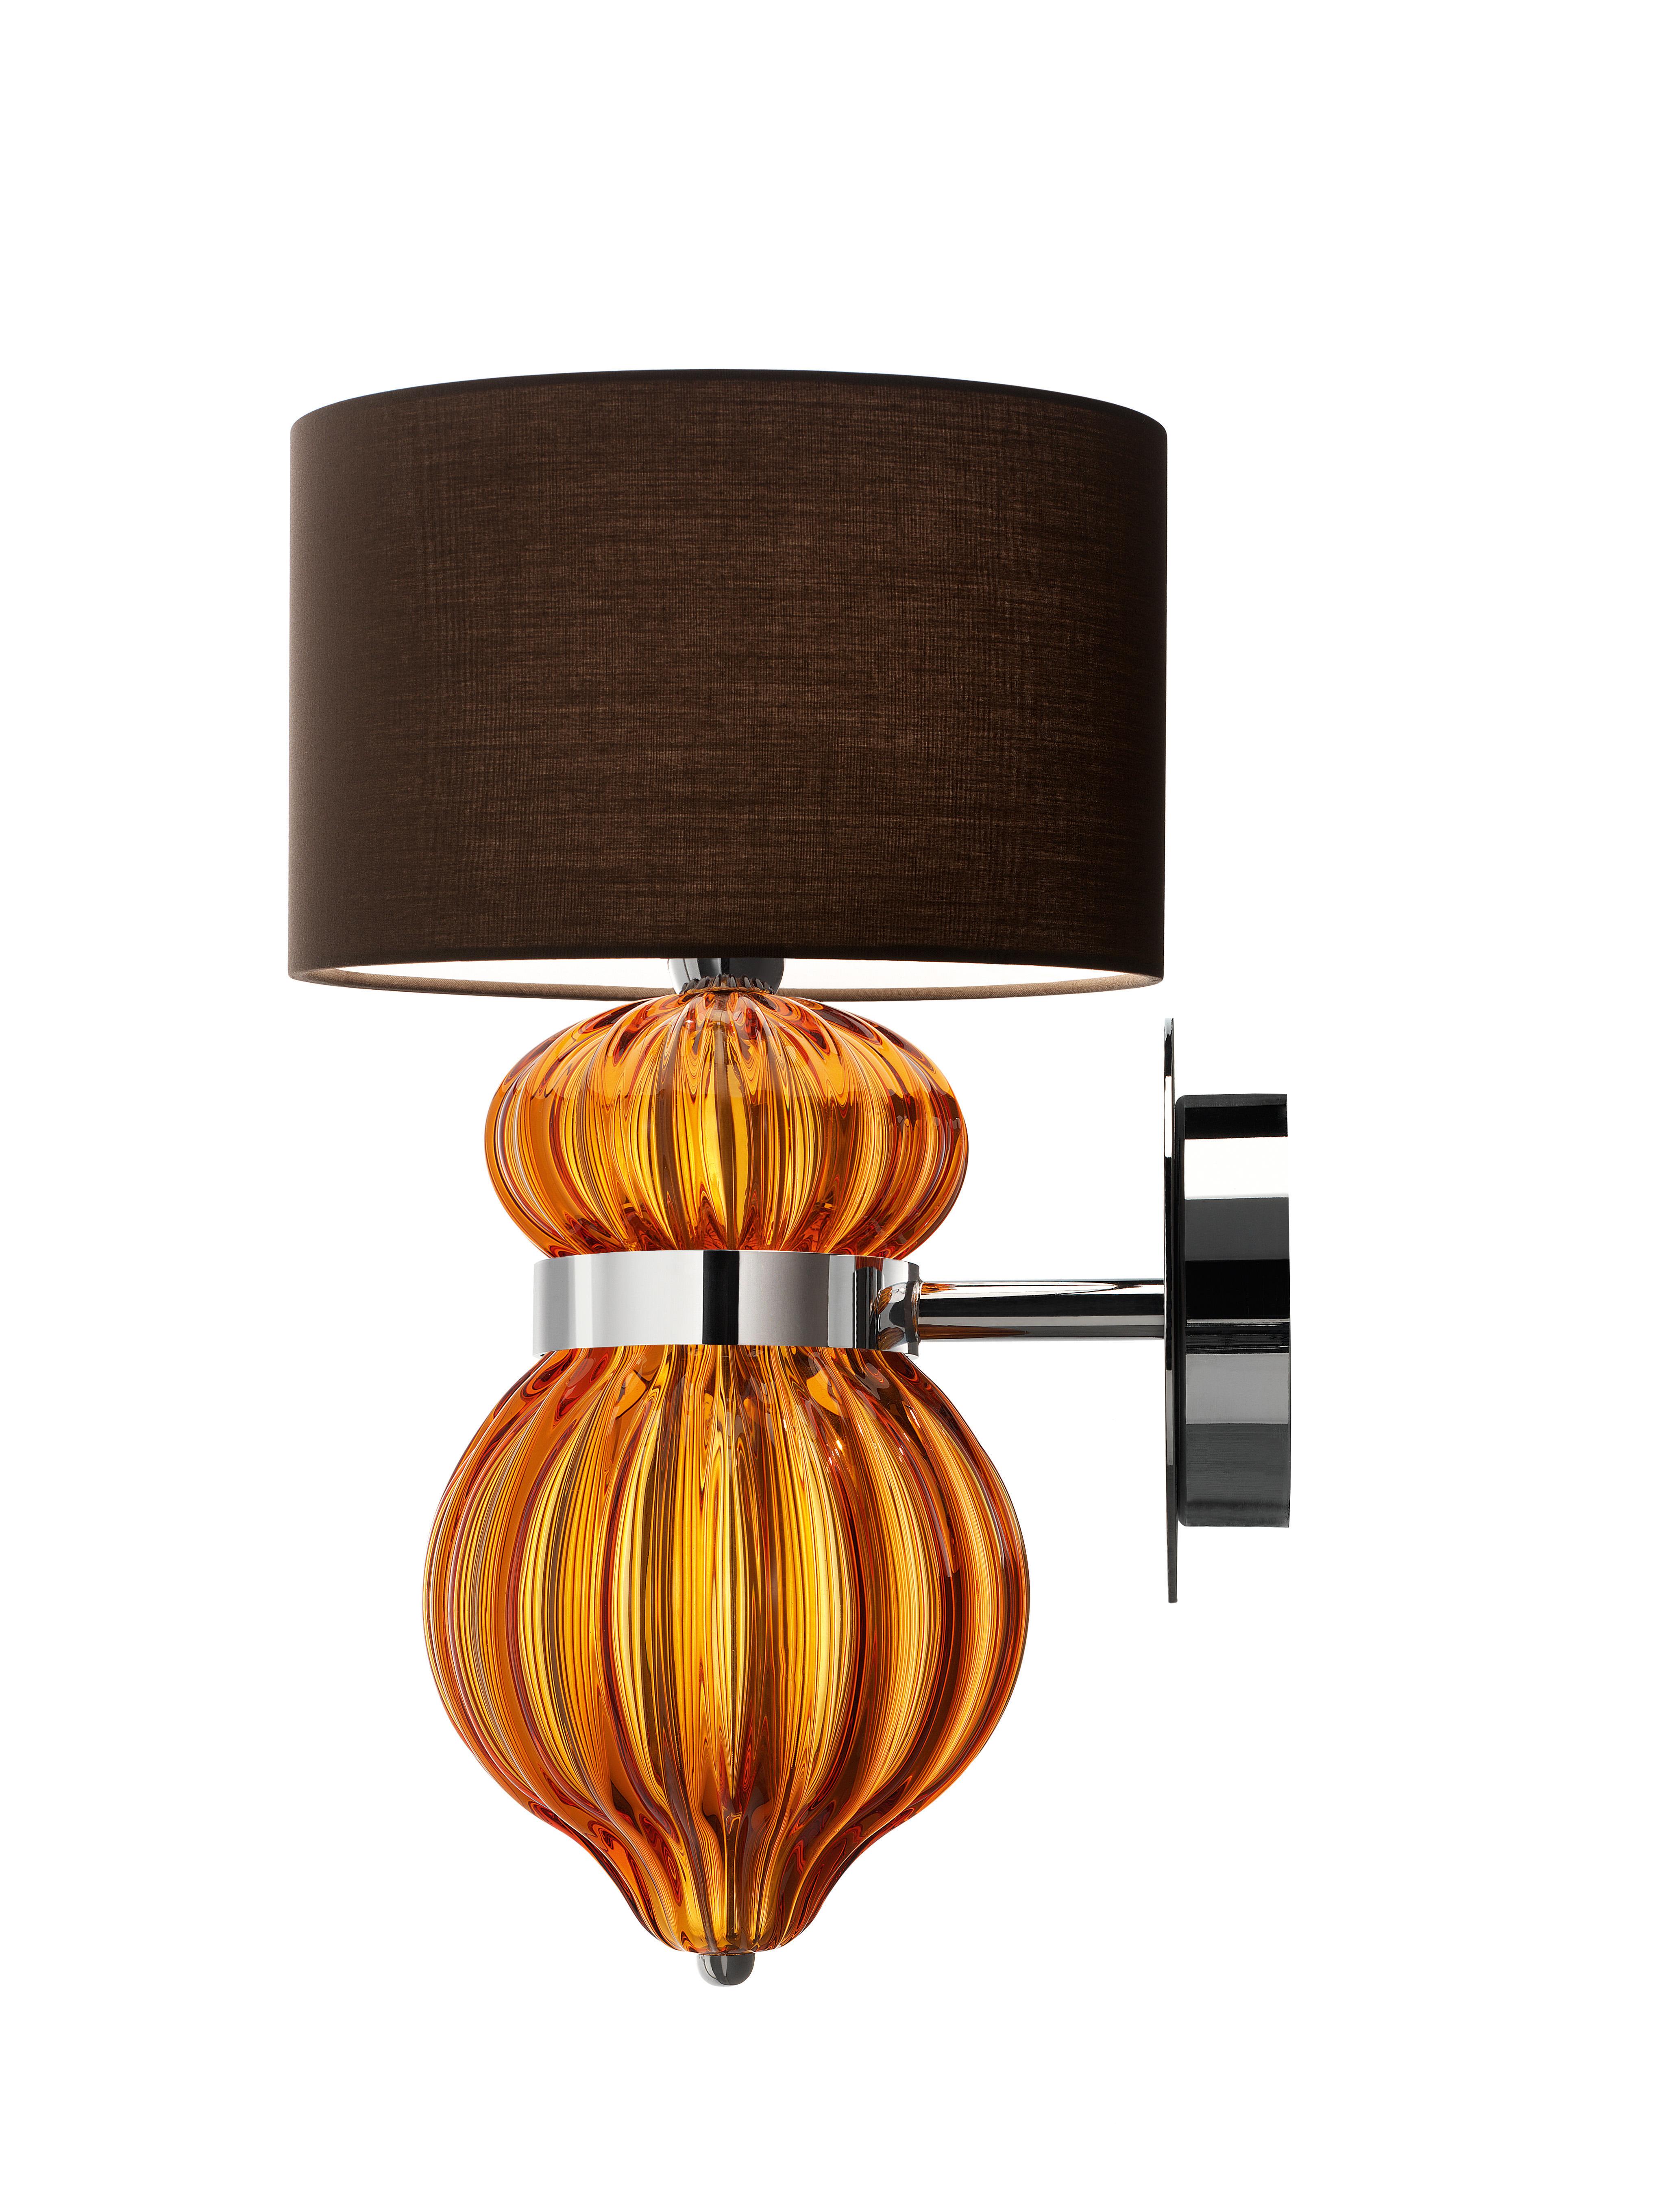 Orange (Caramel_CA) Medina 5683 Wall Sconce in Glass with Brown Shade by, Barovier&Toso 2